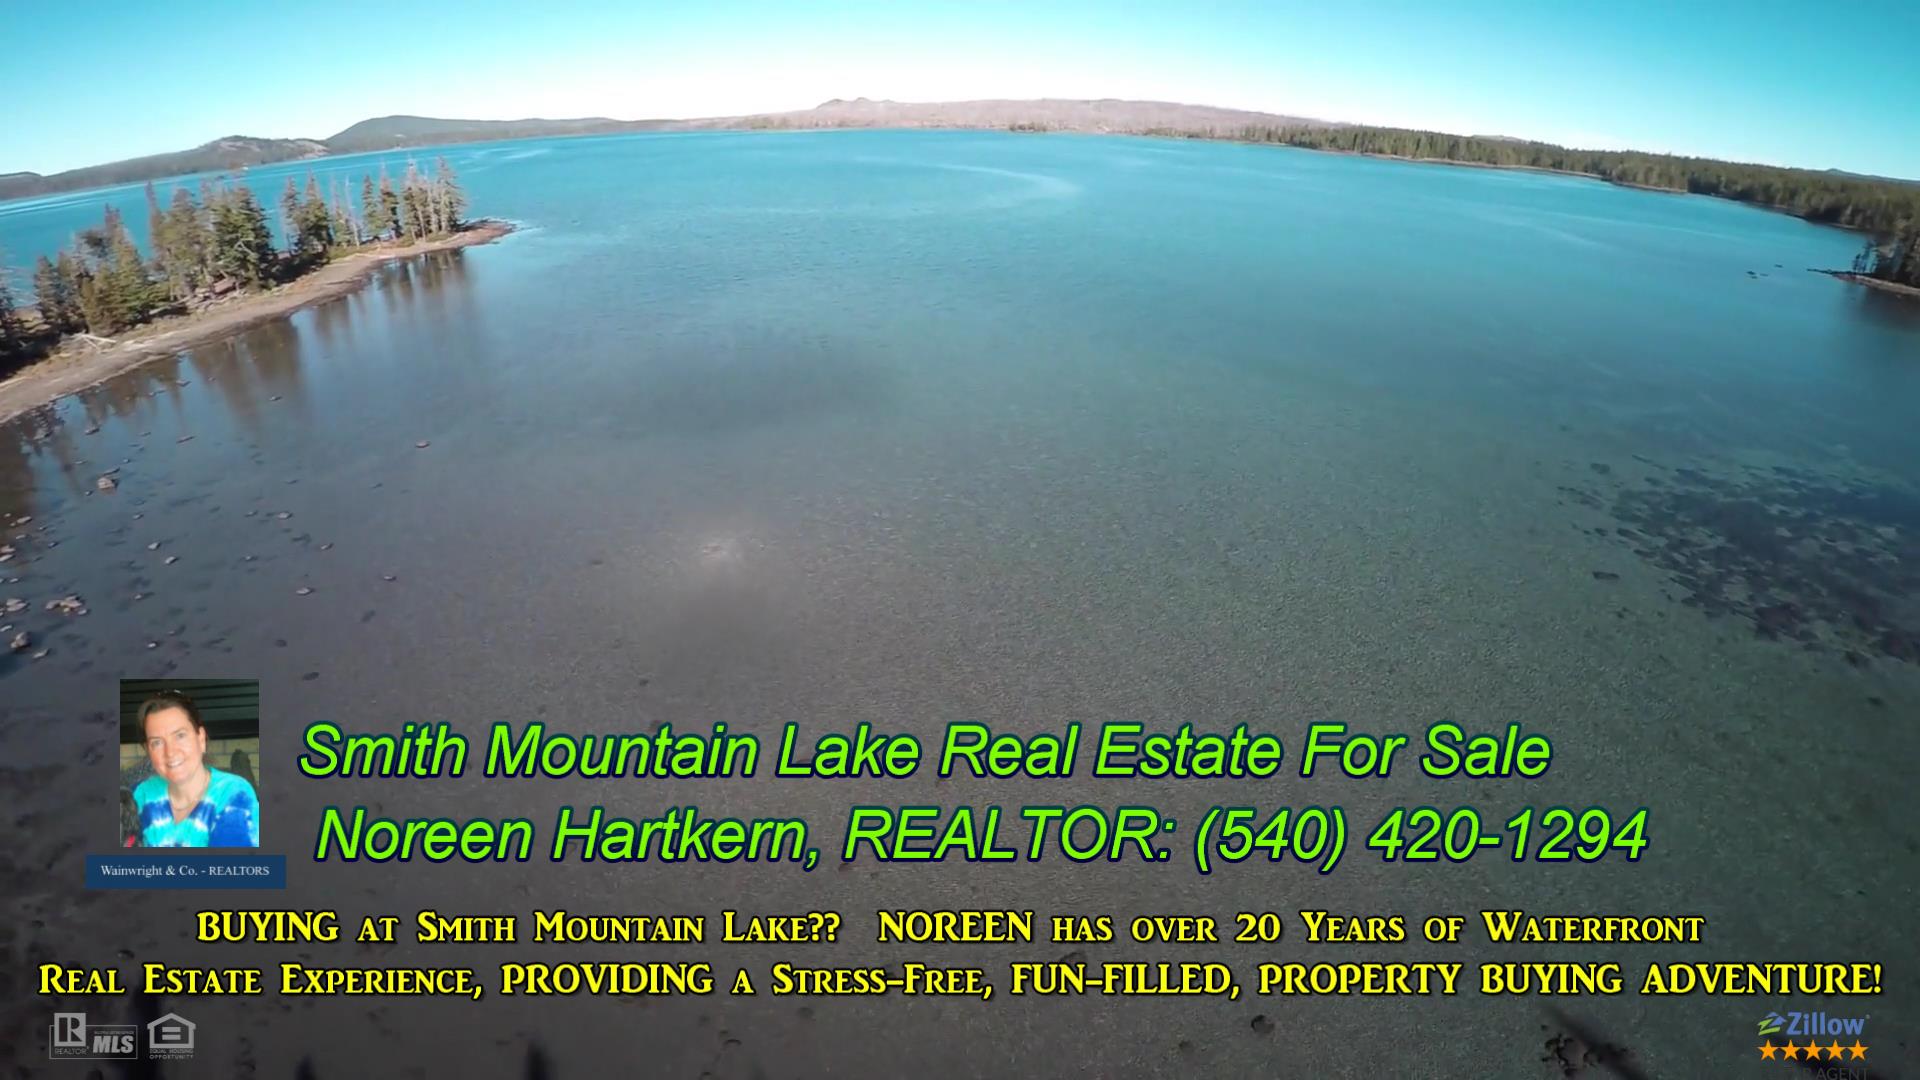 BUYING at Smith Mountain Lake? Noreen has over 20 Years of Waterfront Real Estate Experience, and Provides a Stress-Free, FUN, Property Buying Adventure! FACEBOOK Message Me to Get On My Private Smith Mountain Lake MLS List and Smith Mountain Lake Real Estate Insiders Newsletter with Secret Tips and Tricks on How to Get Your Smith Mountain Lake Waterfront Home, Luxury Estate, Log Home, OR Waterfront Rental Home and CLOSE ON IT in As Little As 3 Weeks!!! *** Schedule Your FREE Strategy Session Today! Call or Text NOW 540-420-1294 ***